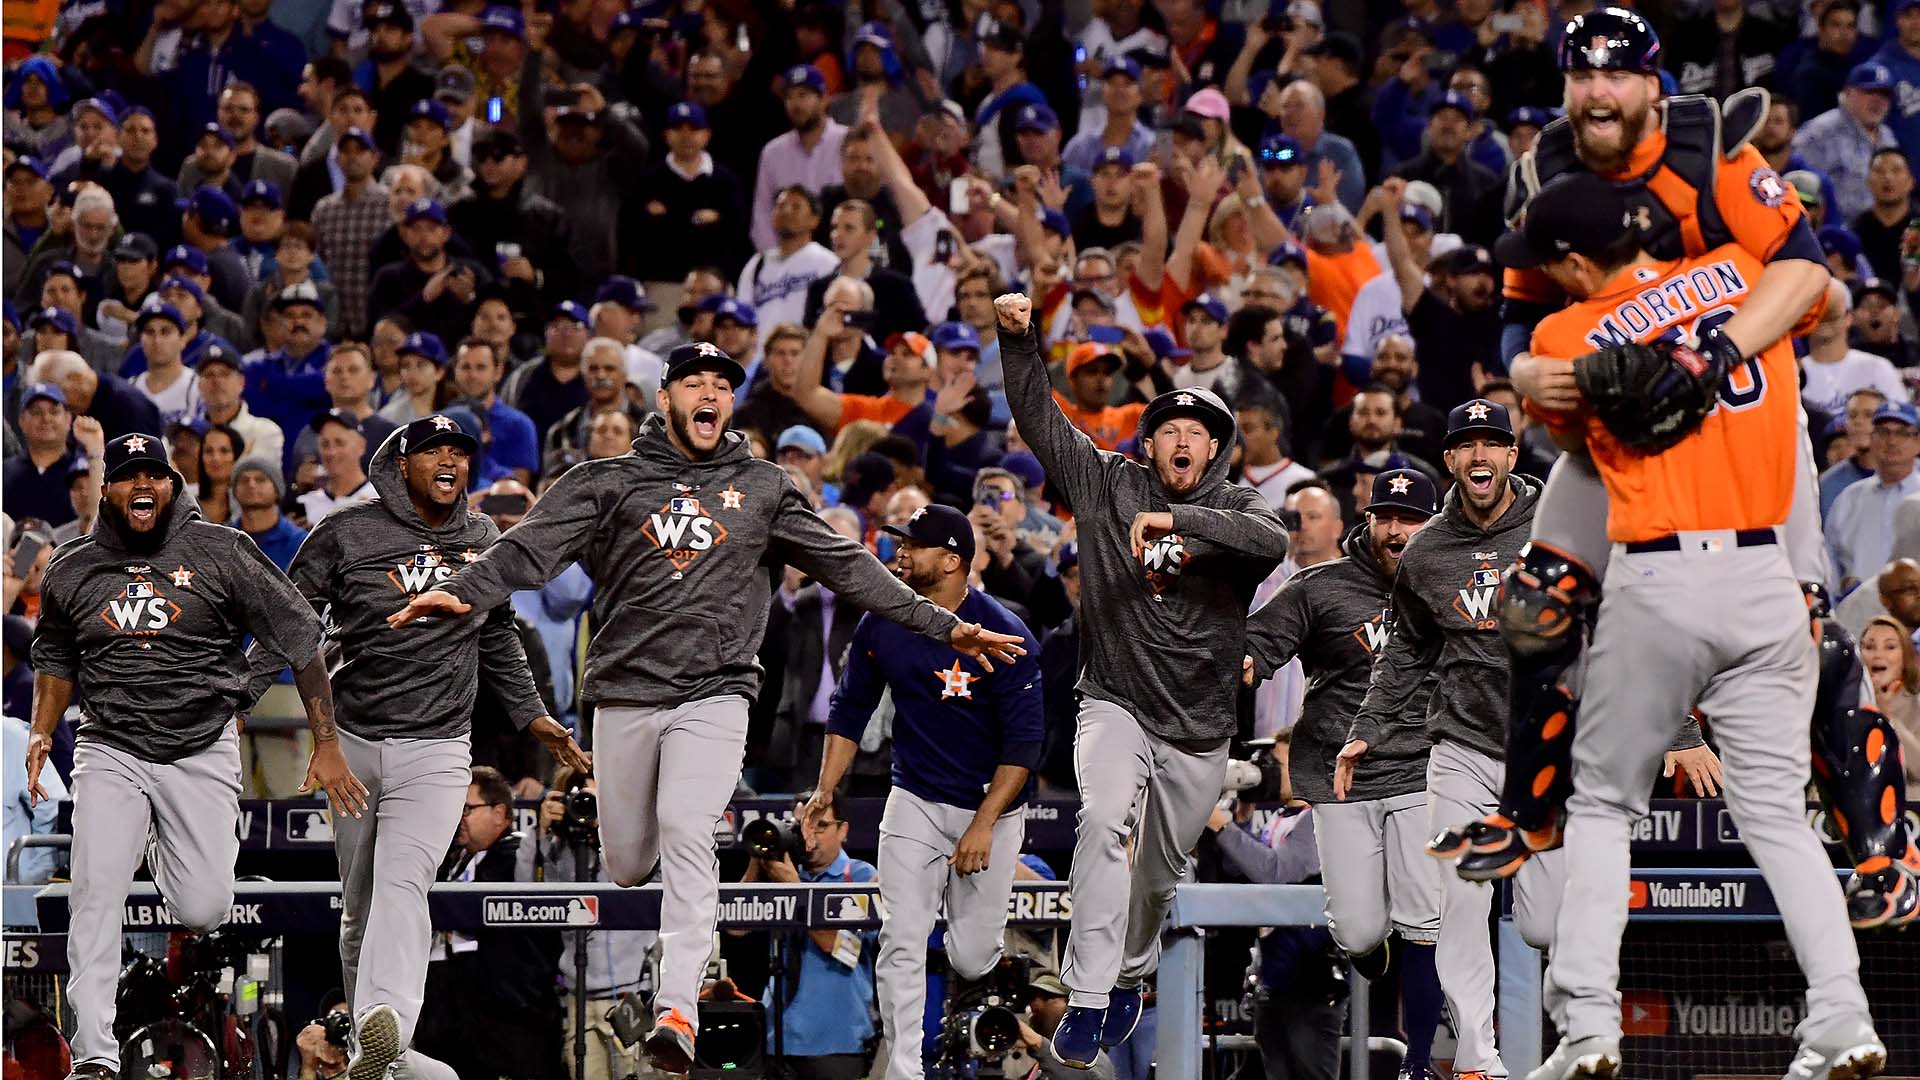 PHOTOS Houston Astros win World Series in Game 7 over L.A. Dodgers